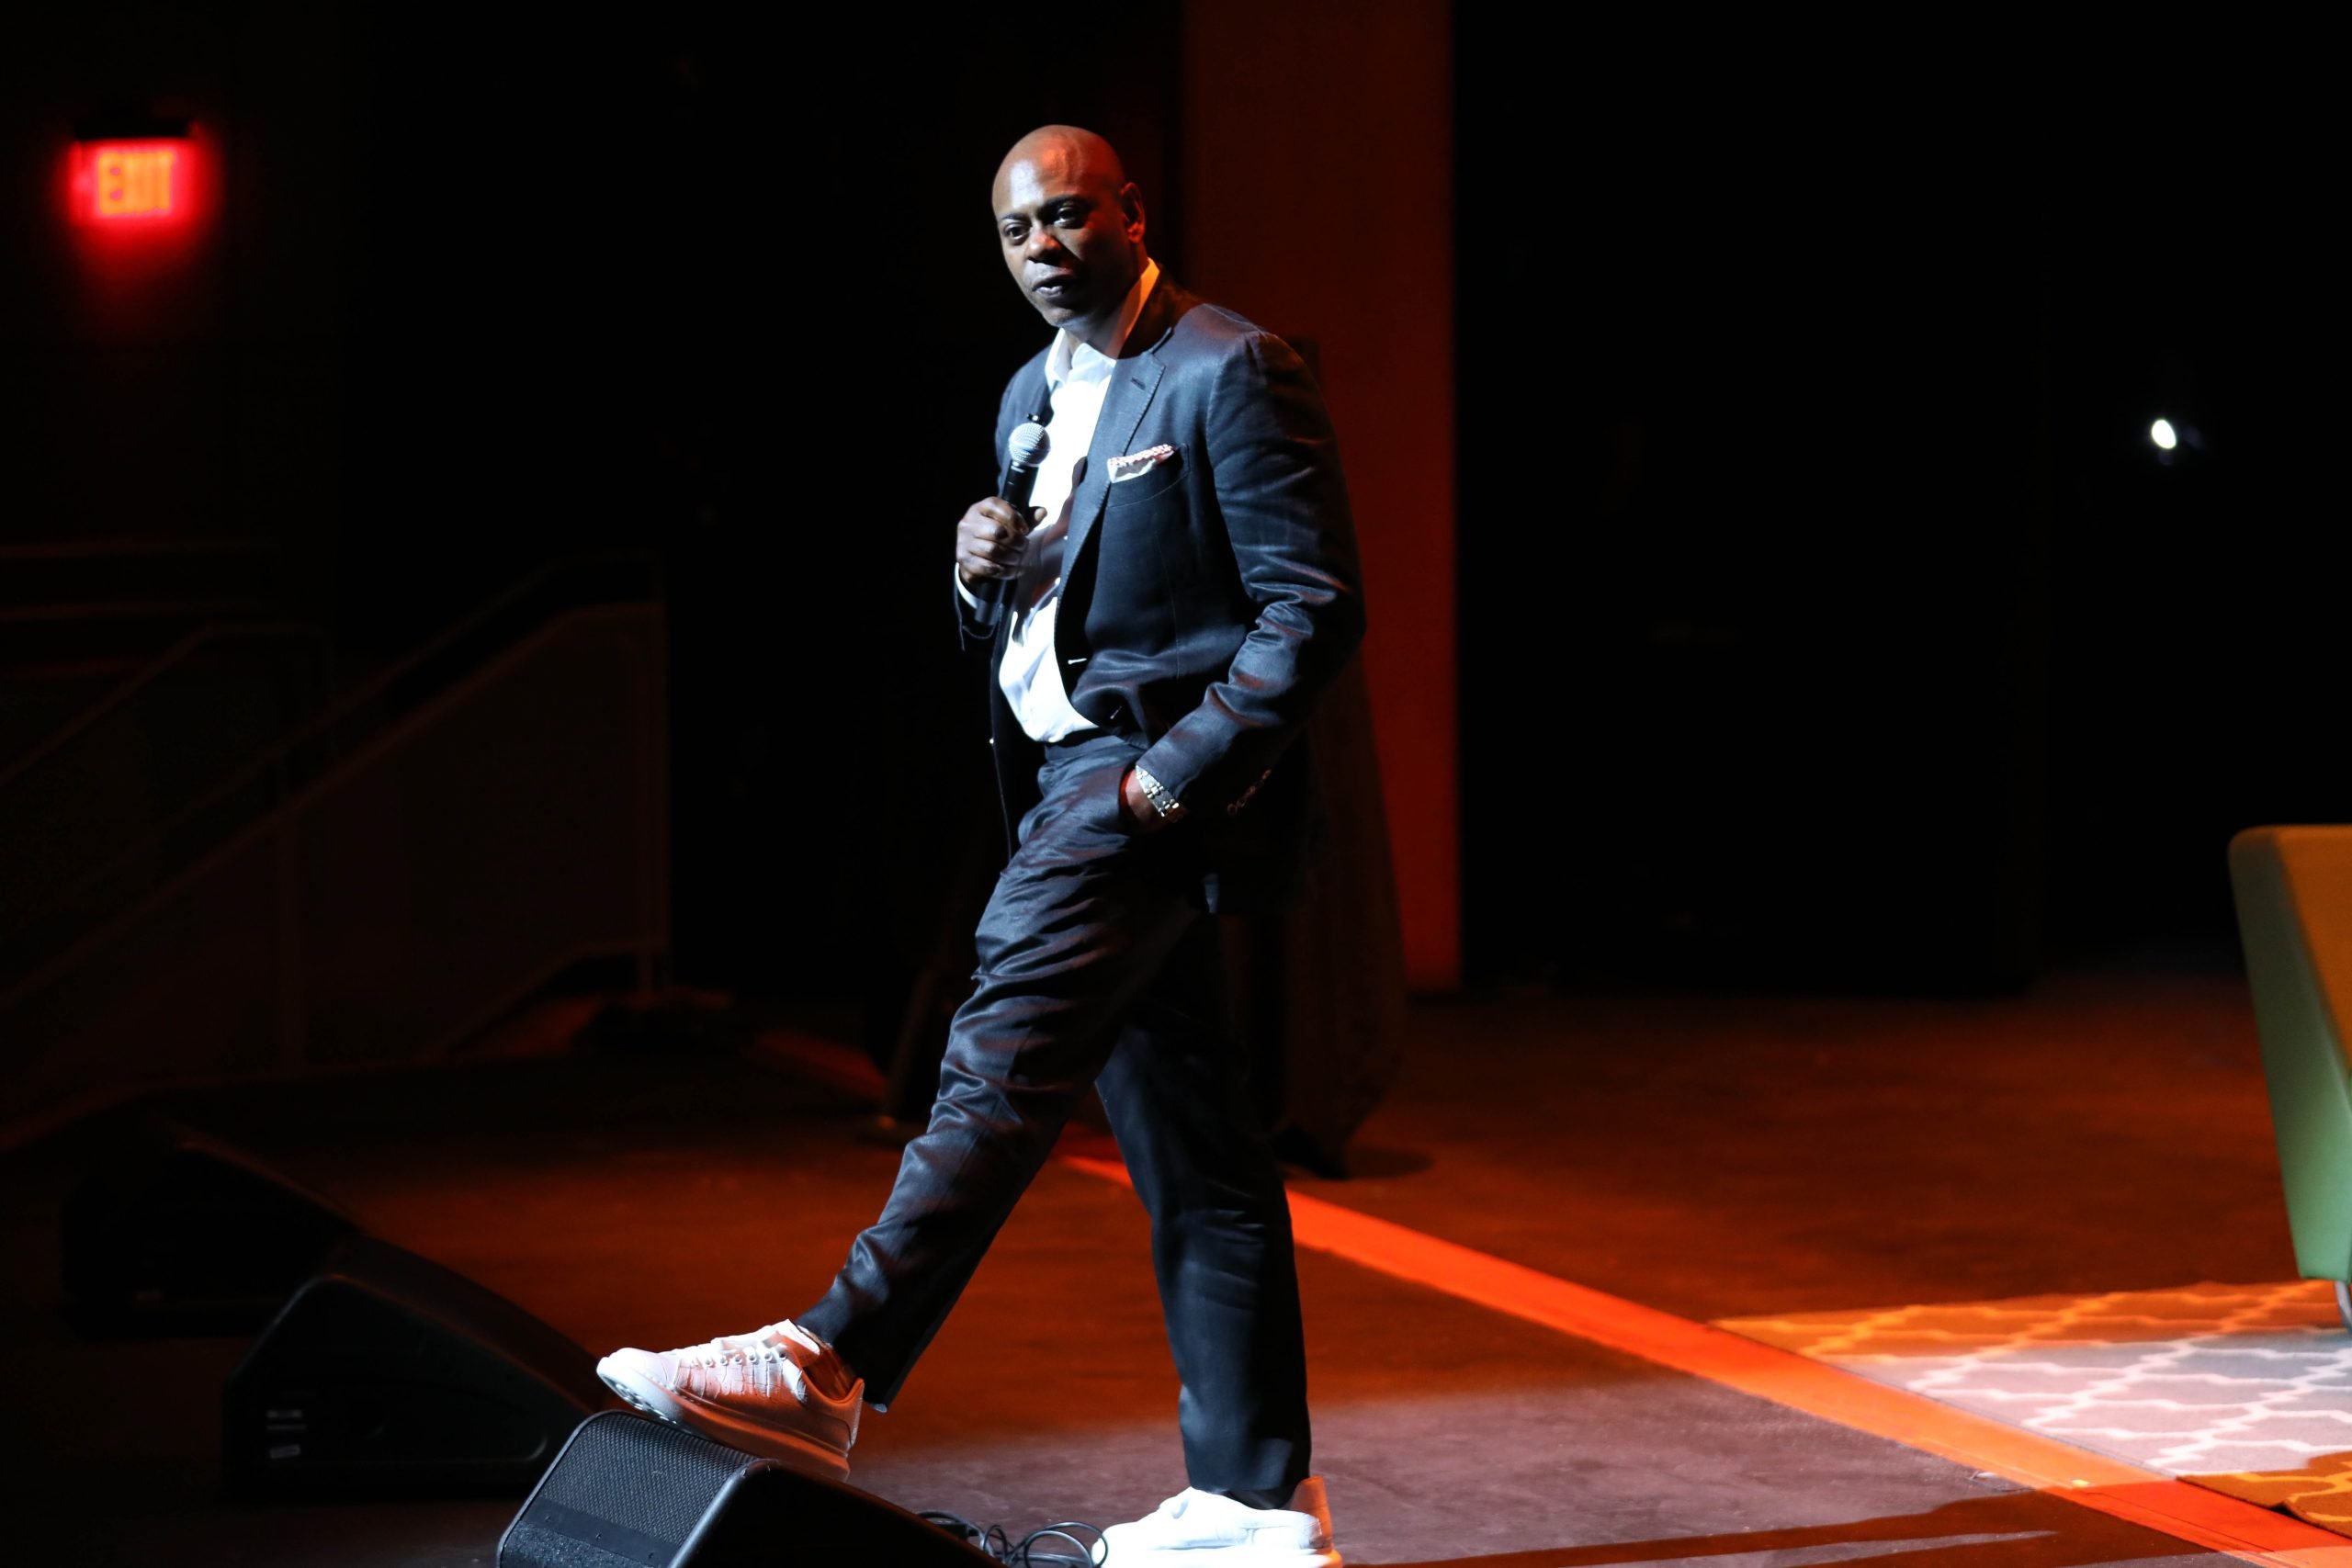 220721 dave chapelle mb 0955 0a566d scaled